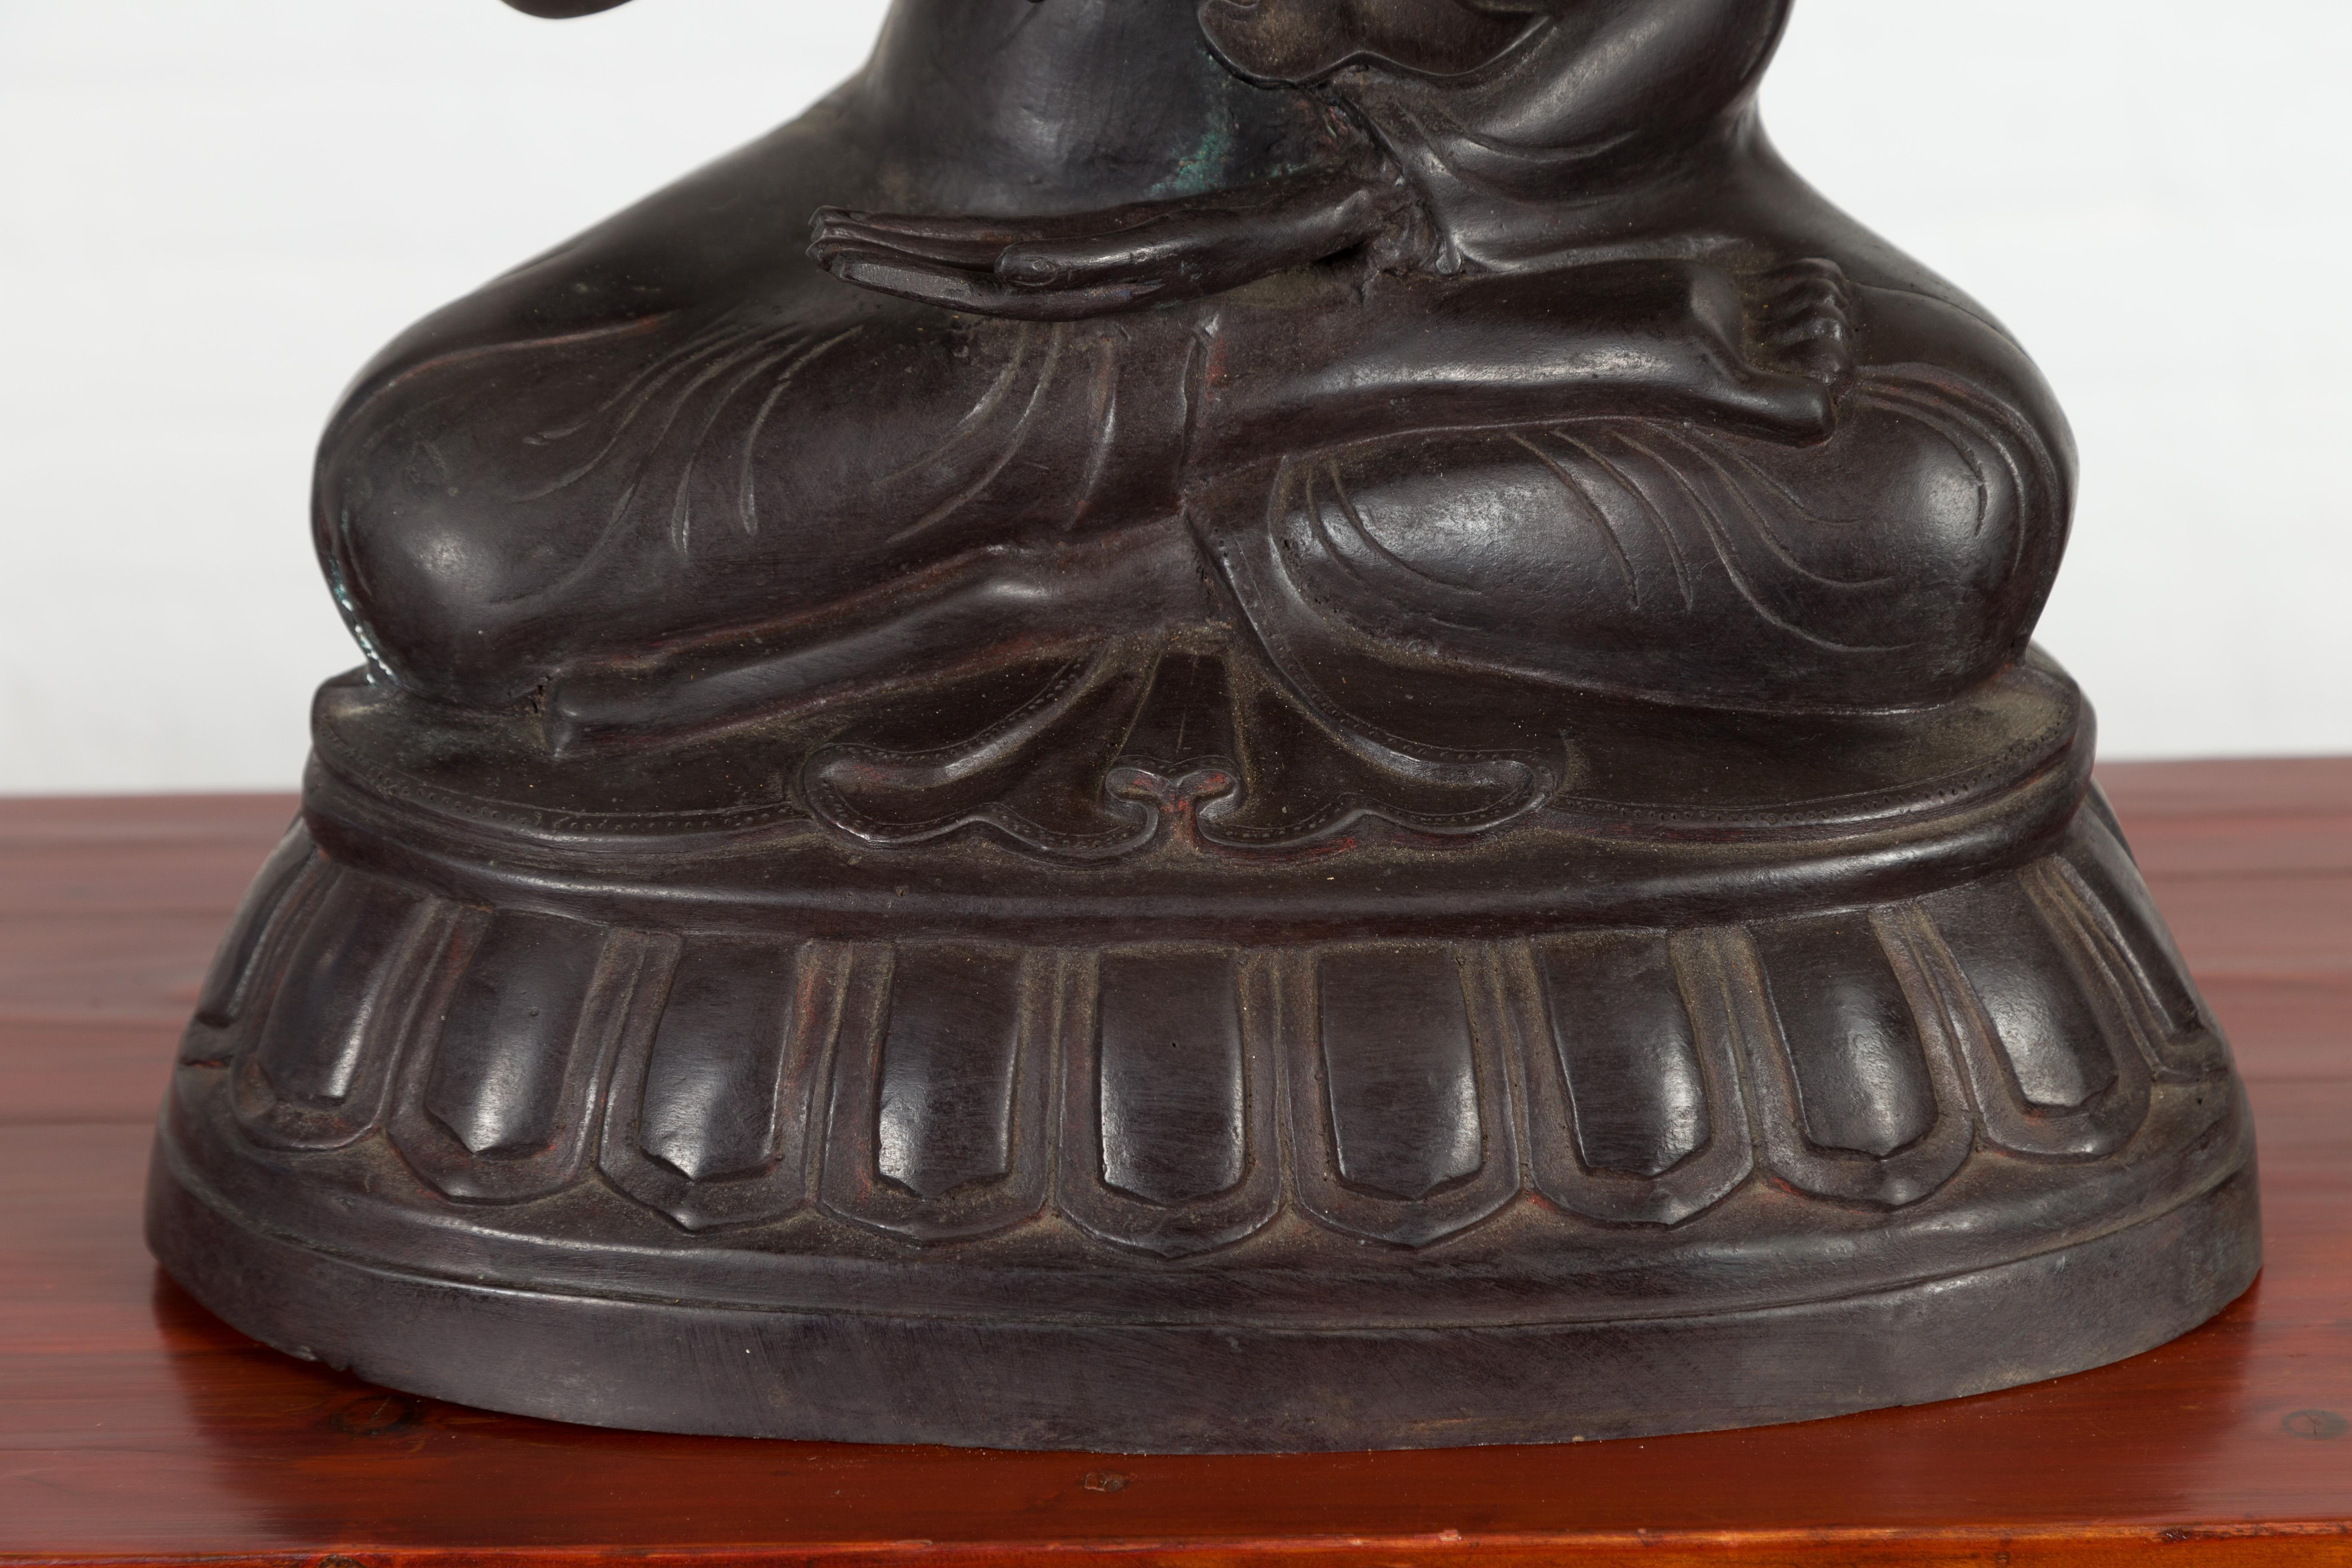 Vintage Bronze Lost Wax Sculpture Depicting a Praying Monk Sitting on a Base For Sale 4